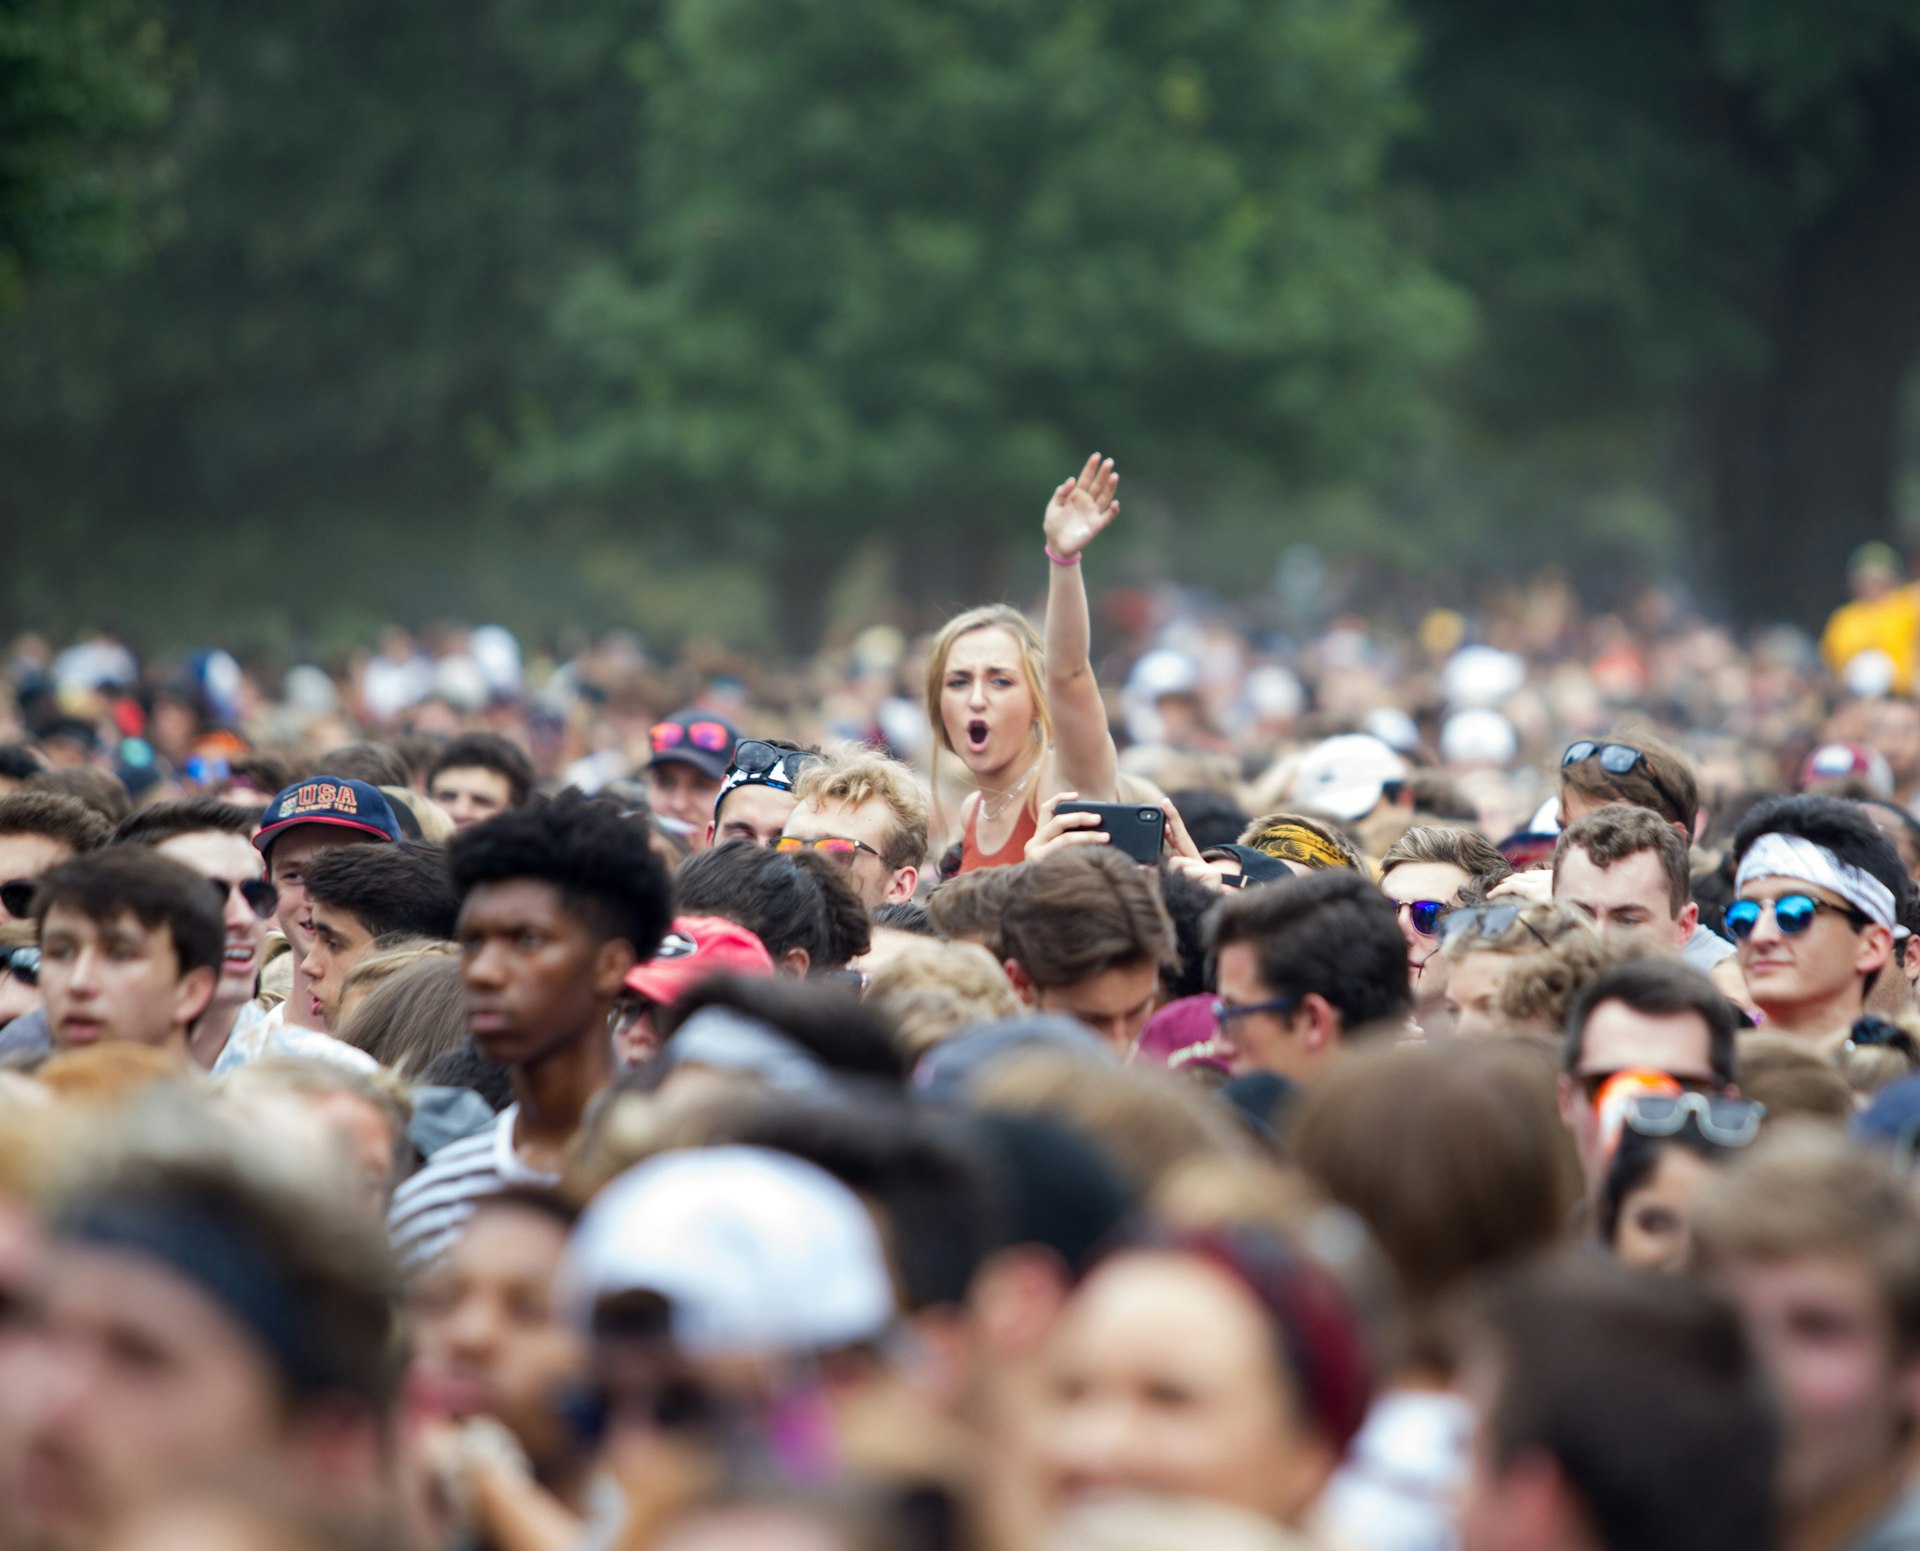 A woman is hoisted above a dense crowd at Music Midtown festival in Piedmont Park, Atlanta, Georgia, USA